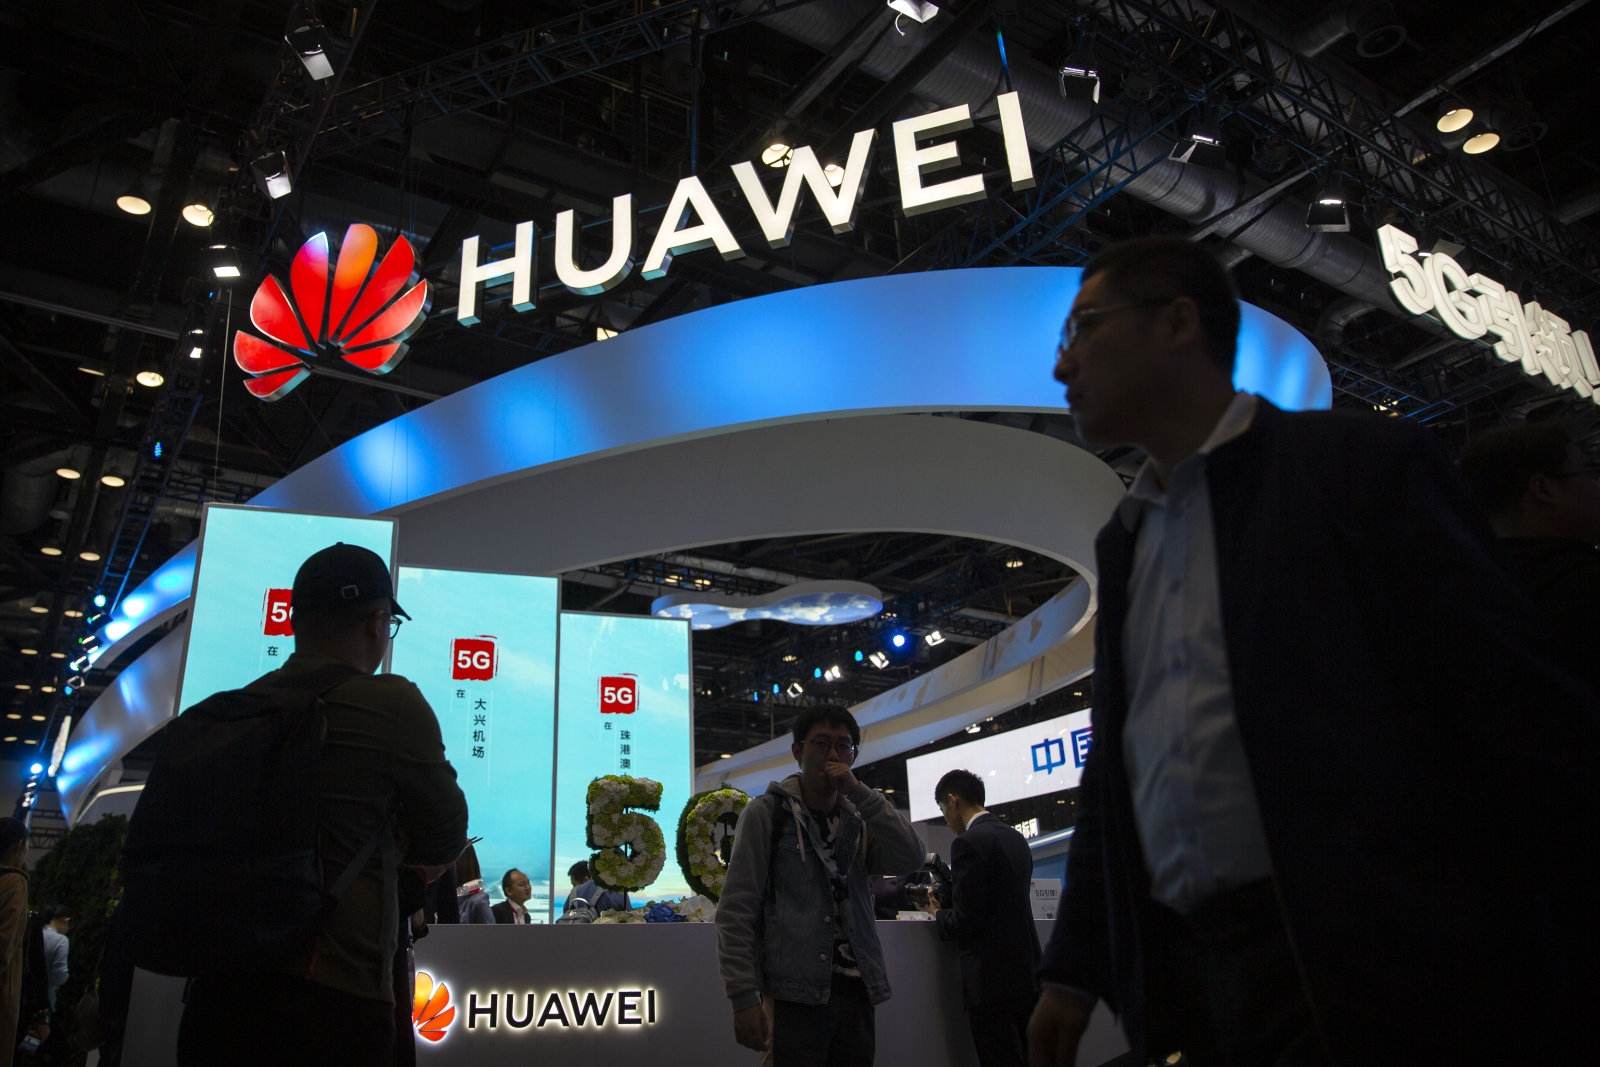 EU won't unilaterally ban Huawei gear from 5G networks | DeviceDaily.com